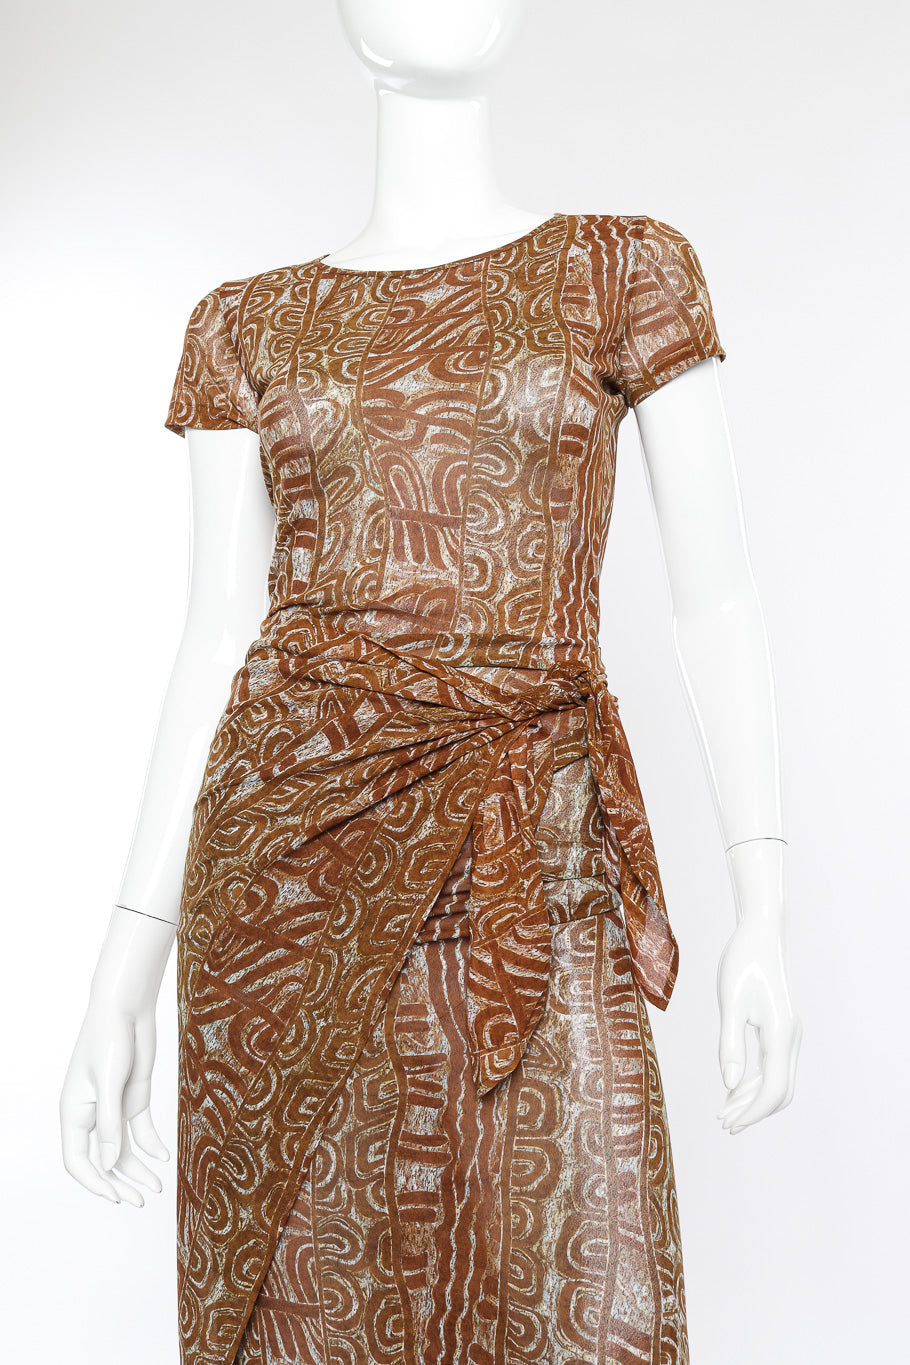 Graphic wrap dress by Kenzo on mannequin front close @recessla